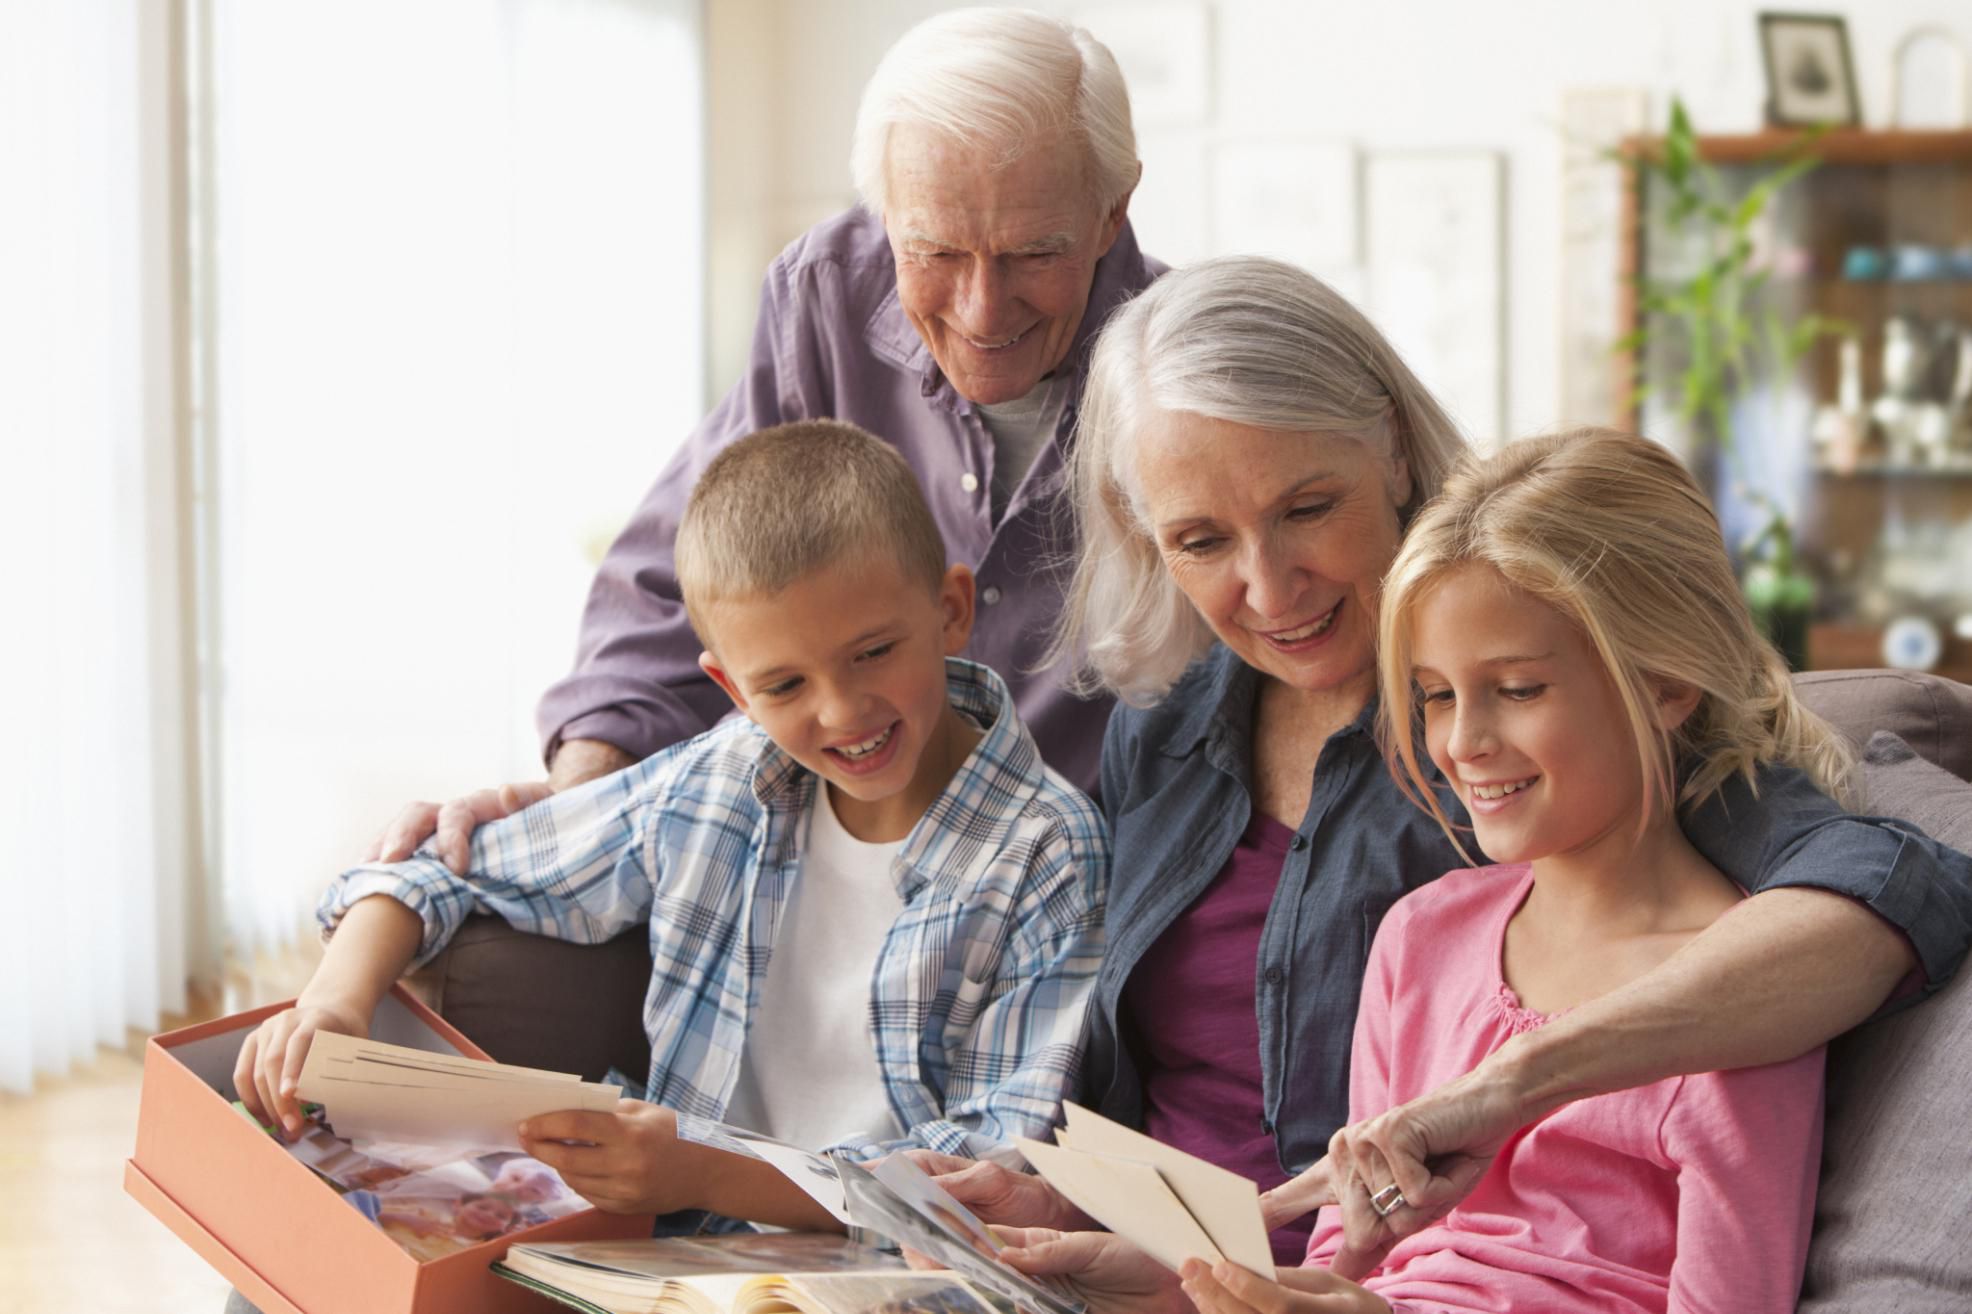 Download 10 Things About Using Grandparents for Child Care